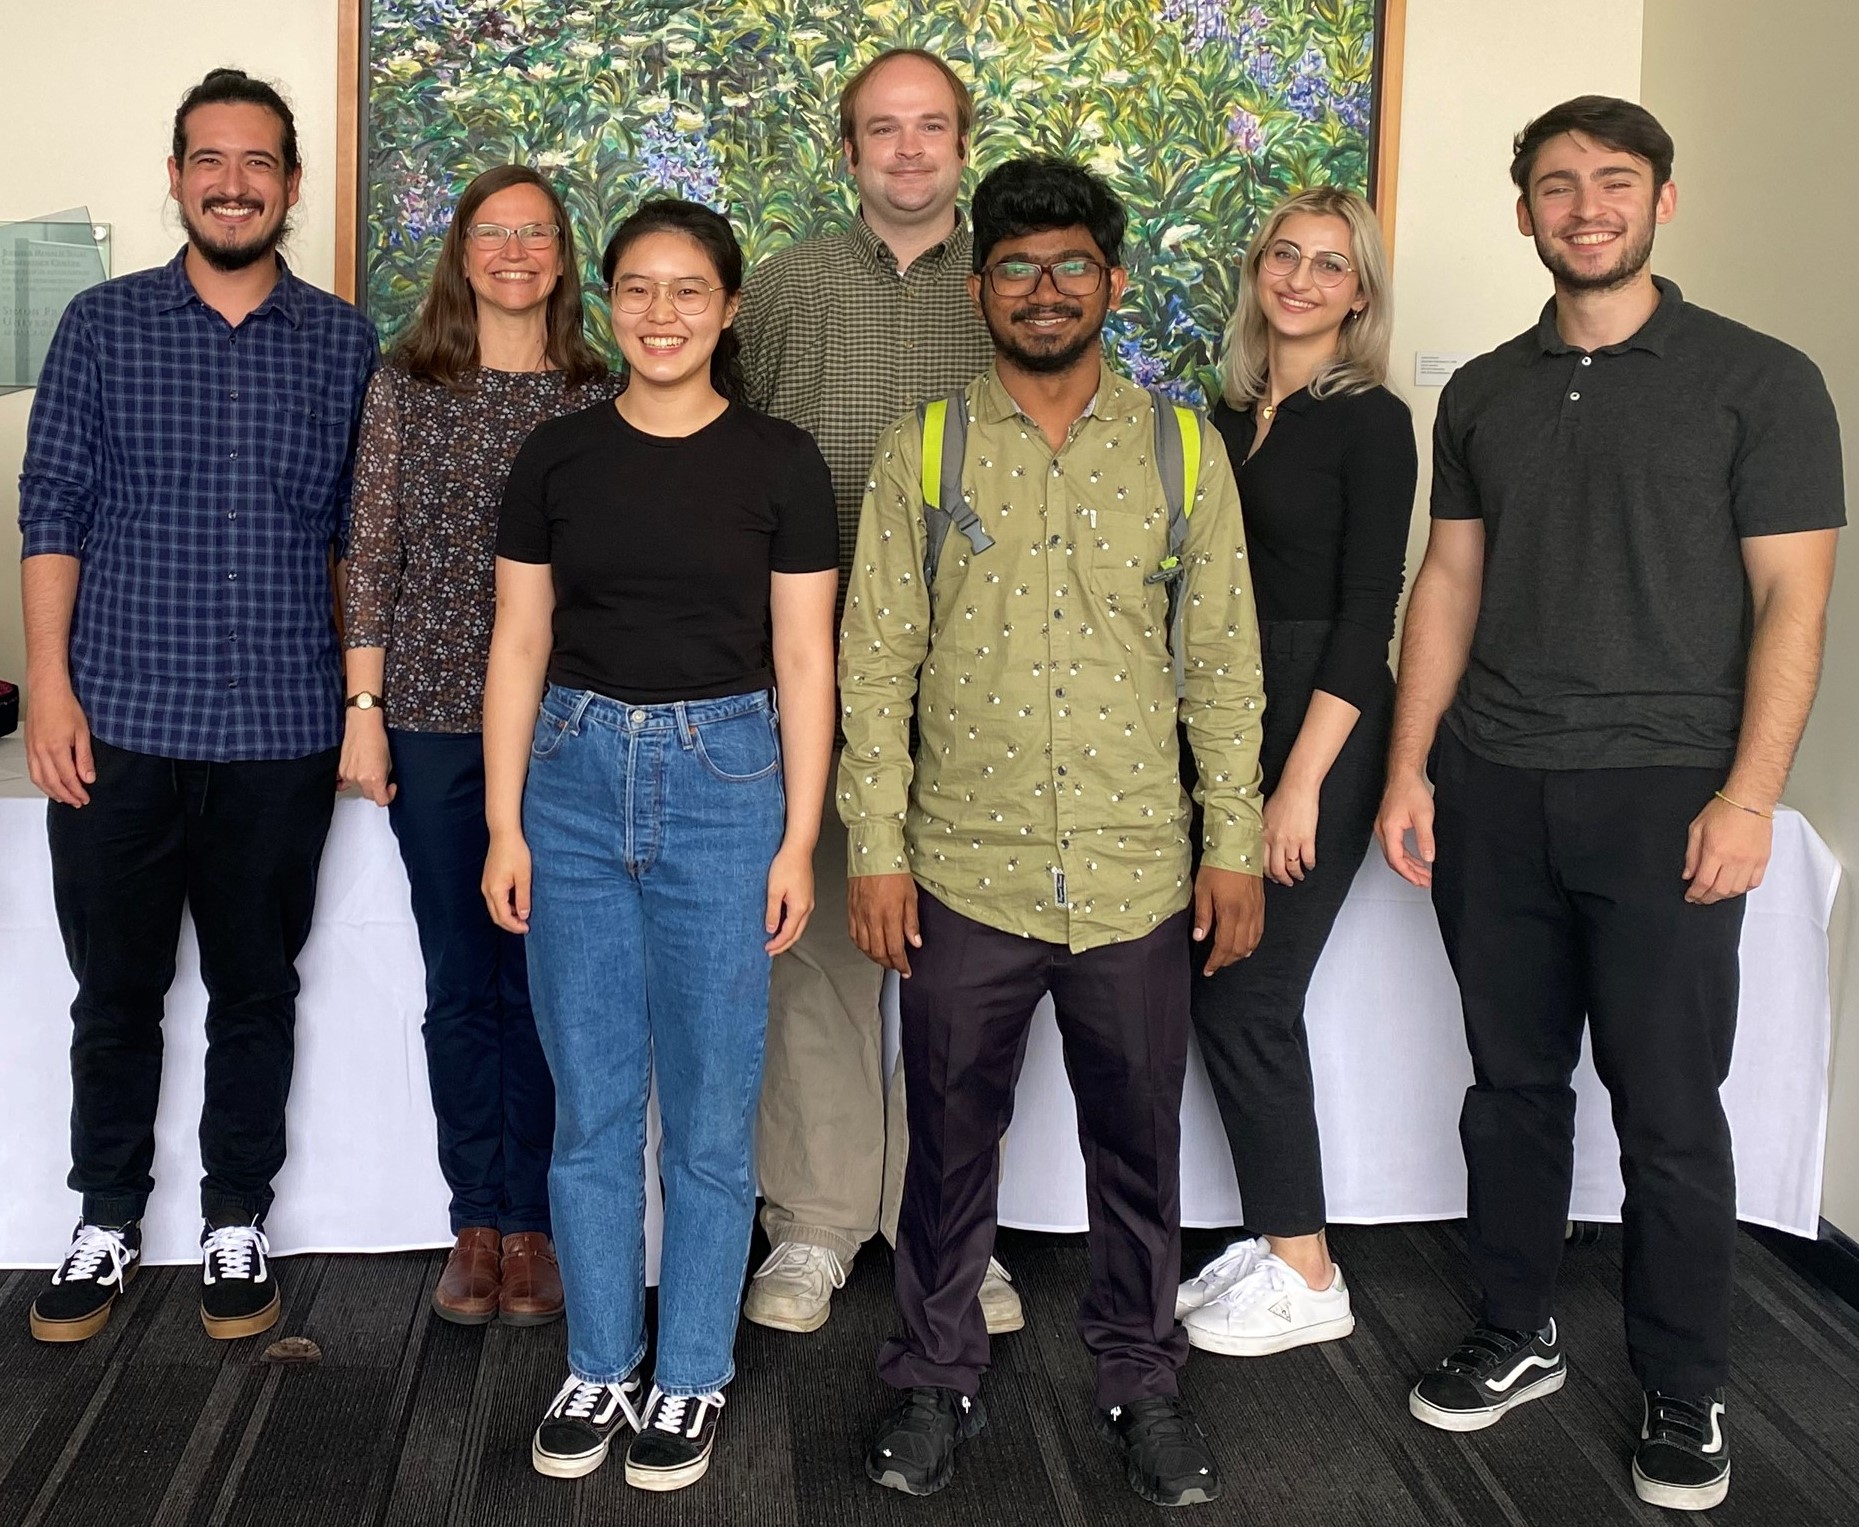 Forde lab photo at Frontiers in Biophysics